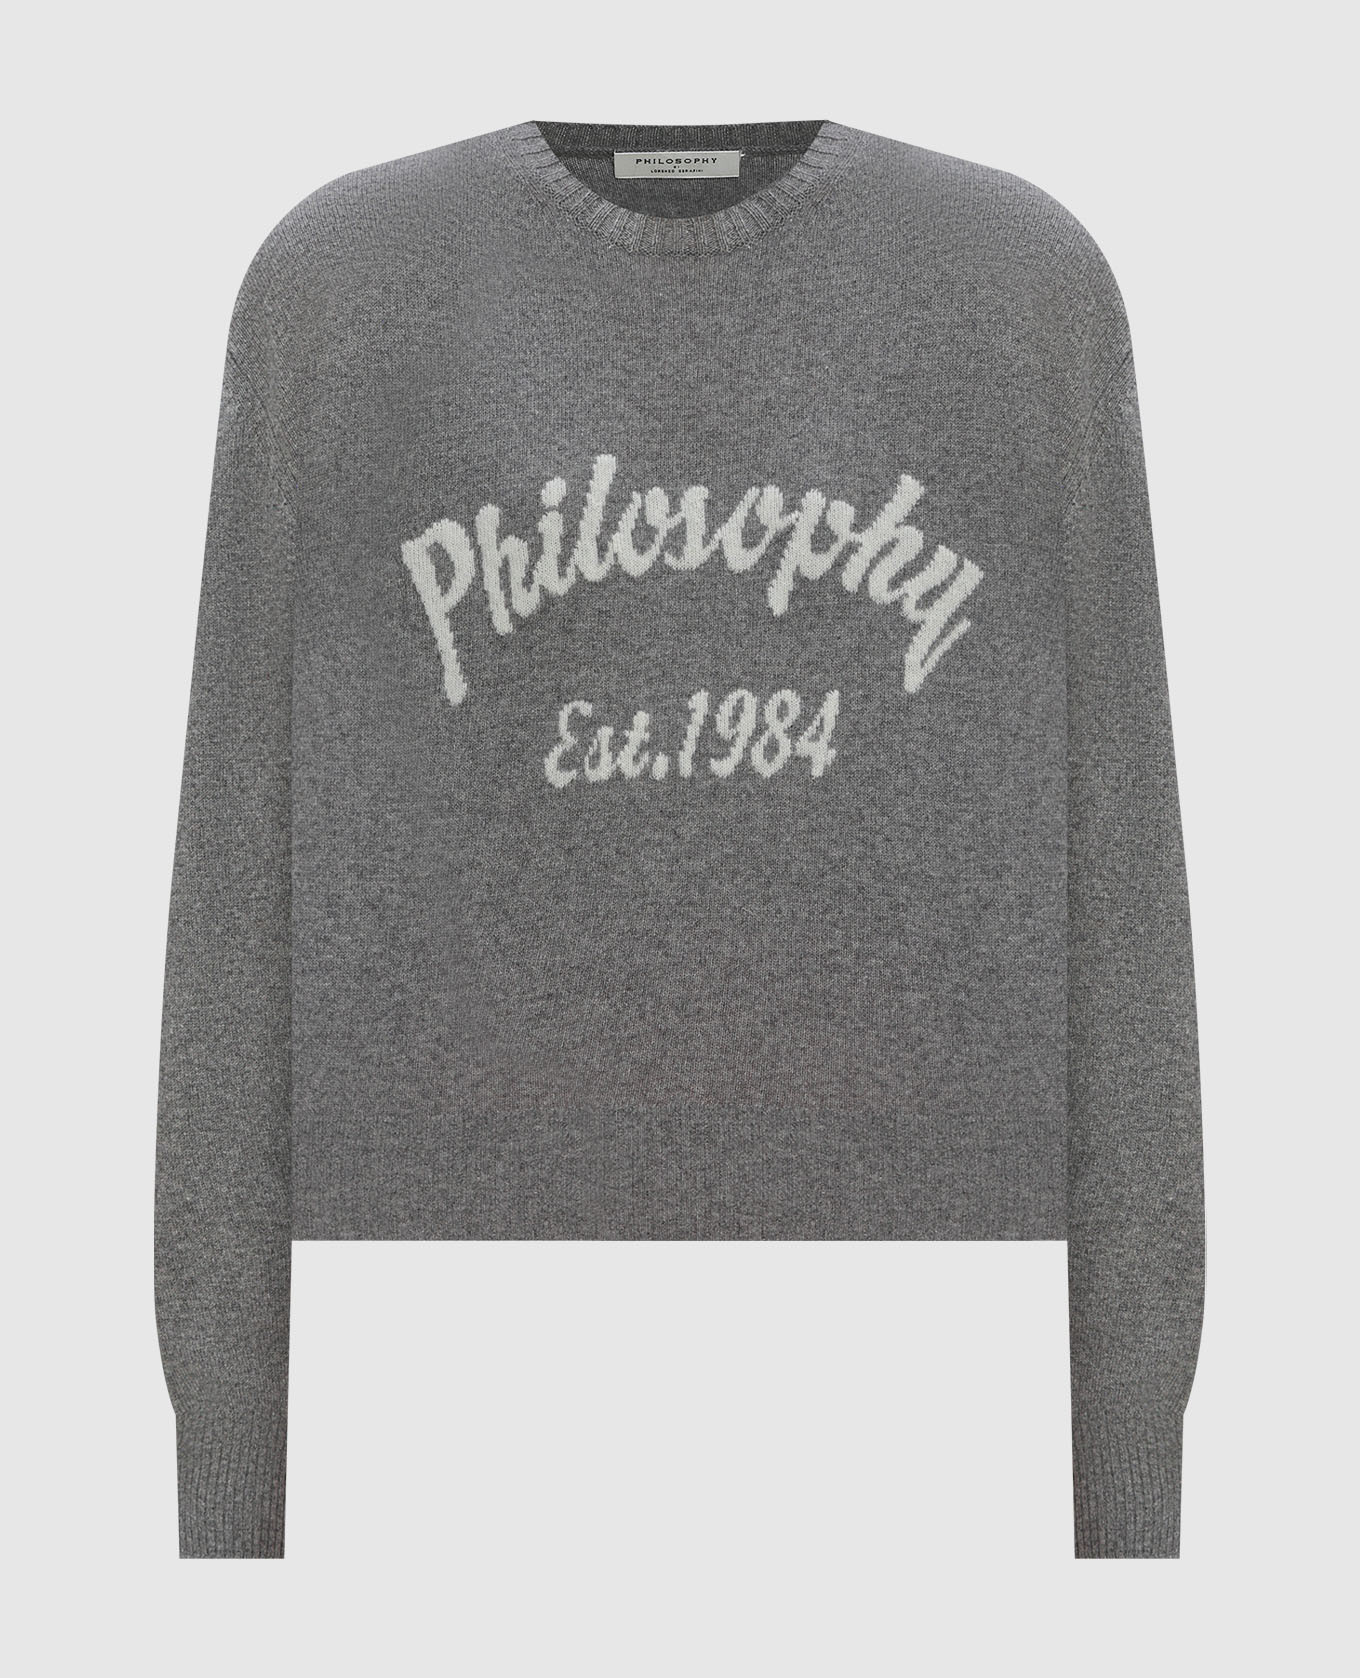 Gray wool and cashmere logo jumper